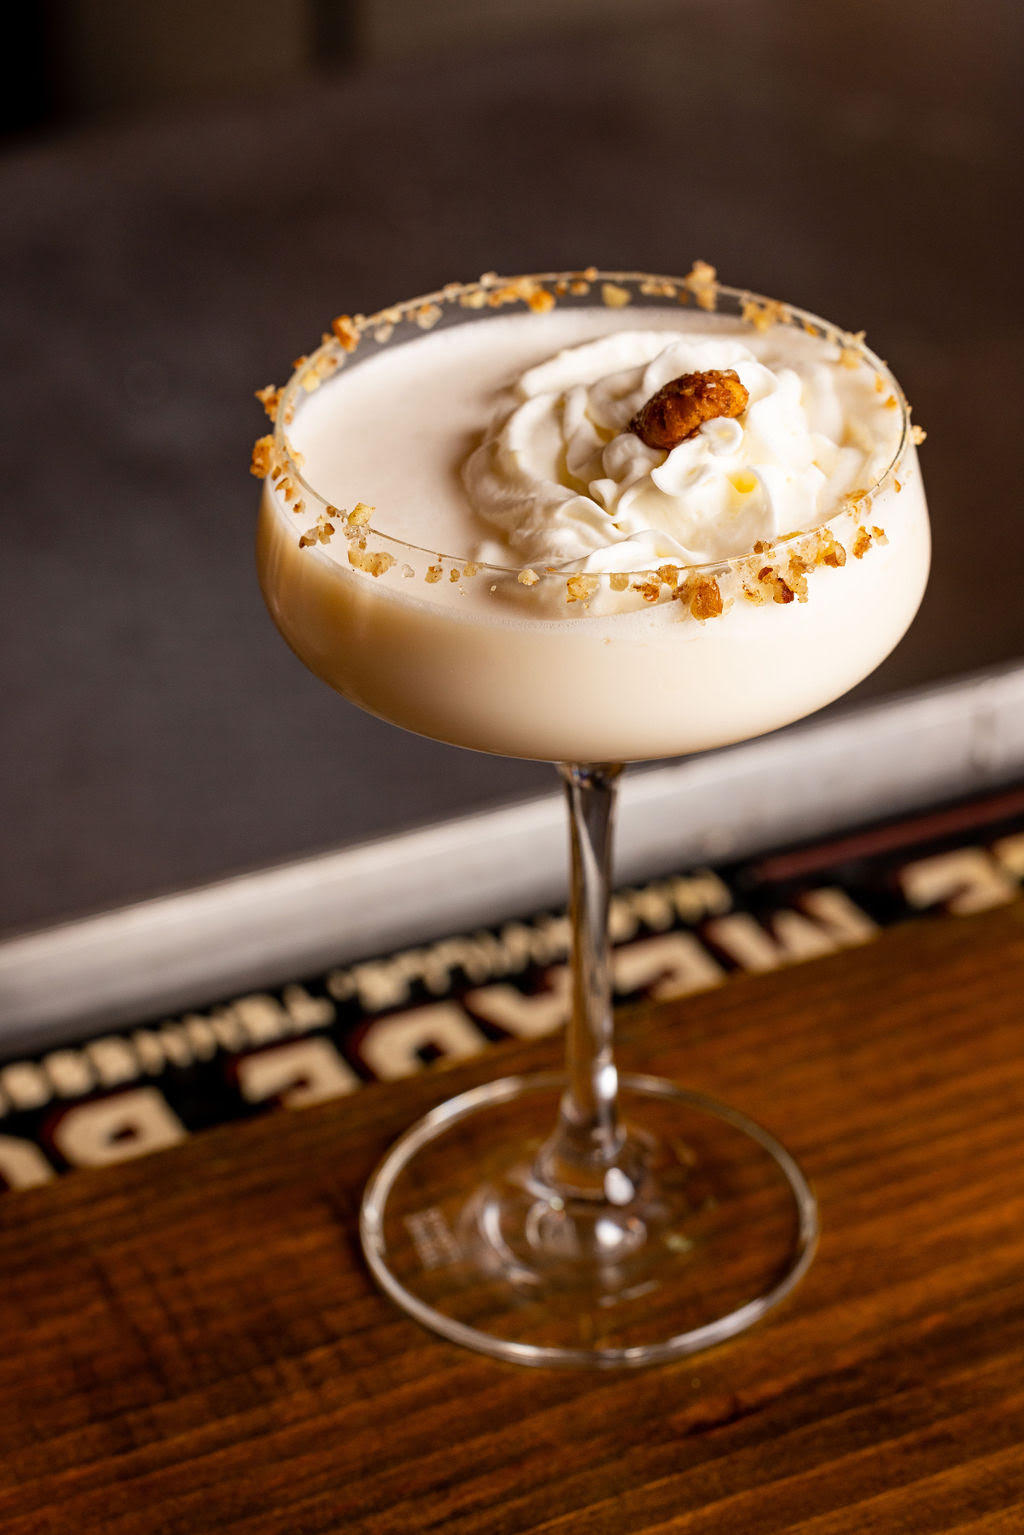 Our Pecan Pie Martini is the “Ultimate Fall Dessert Drink”